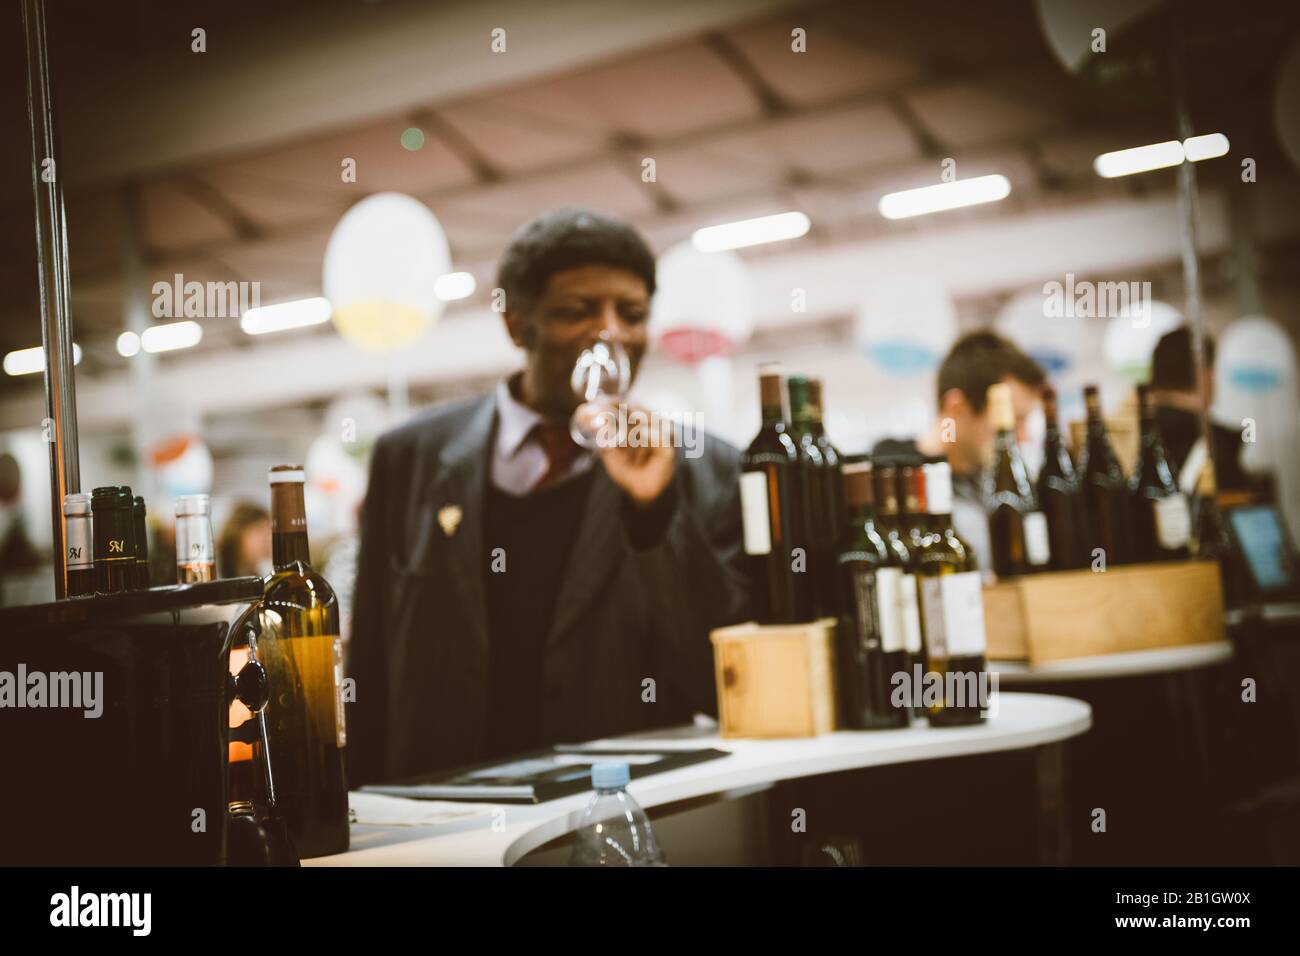 Strasbourg, France - Feb 16, 2020: Defocused silhouette of black ethnicity sommelier tasting wine at the Vignerons independant English: Independent winemakers of France wine fair Stock Photo